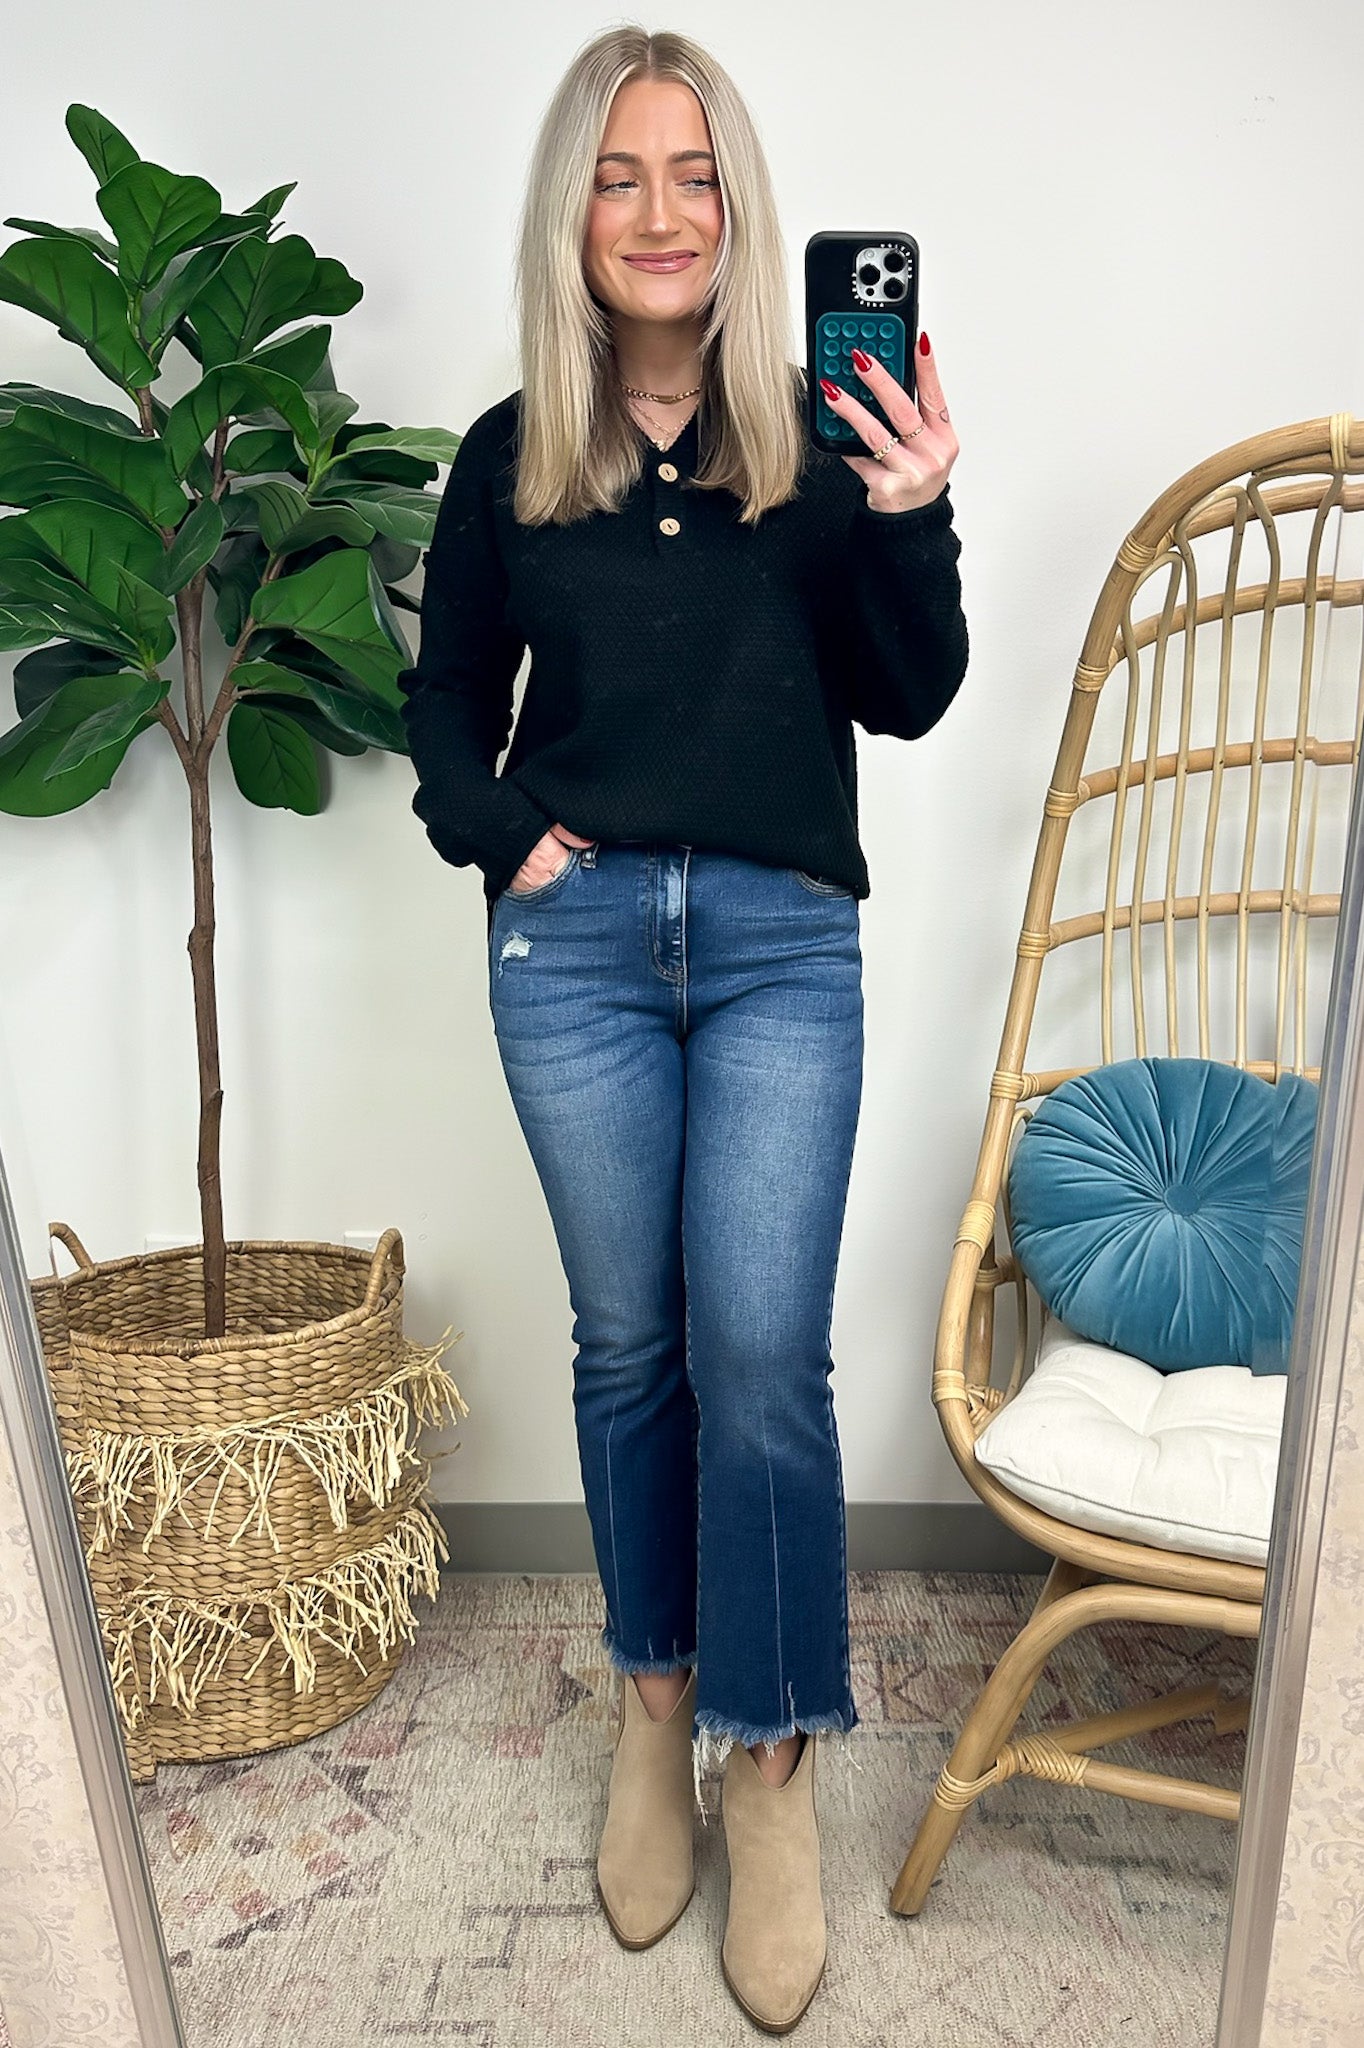  Kyrie Button Henley Knit Sweater - FINAL SALE - Madison and Mallory